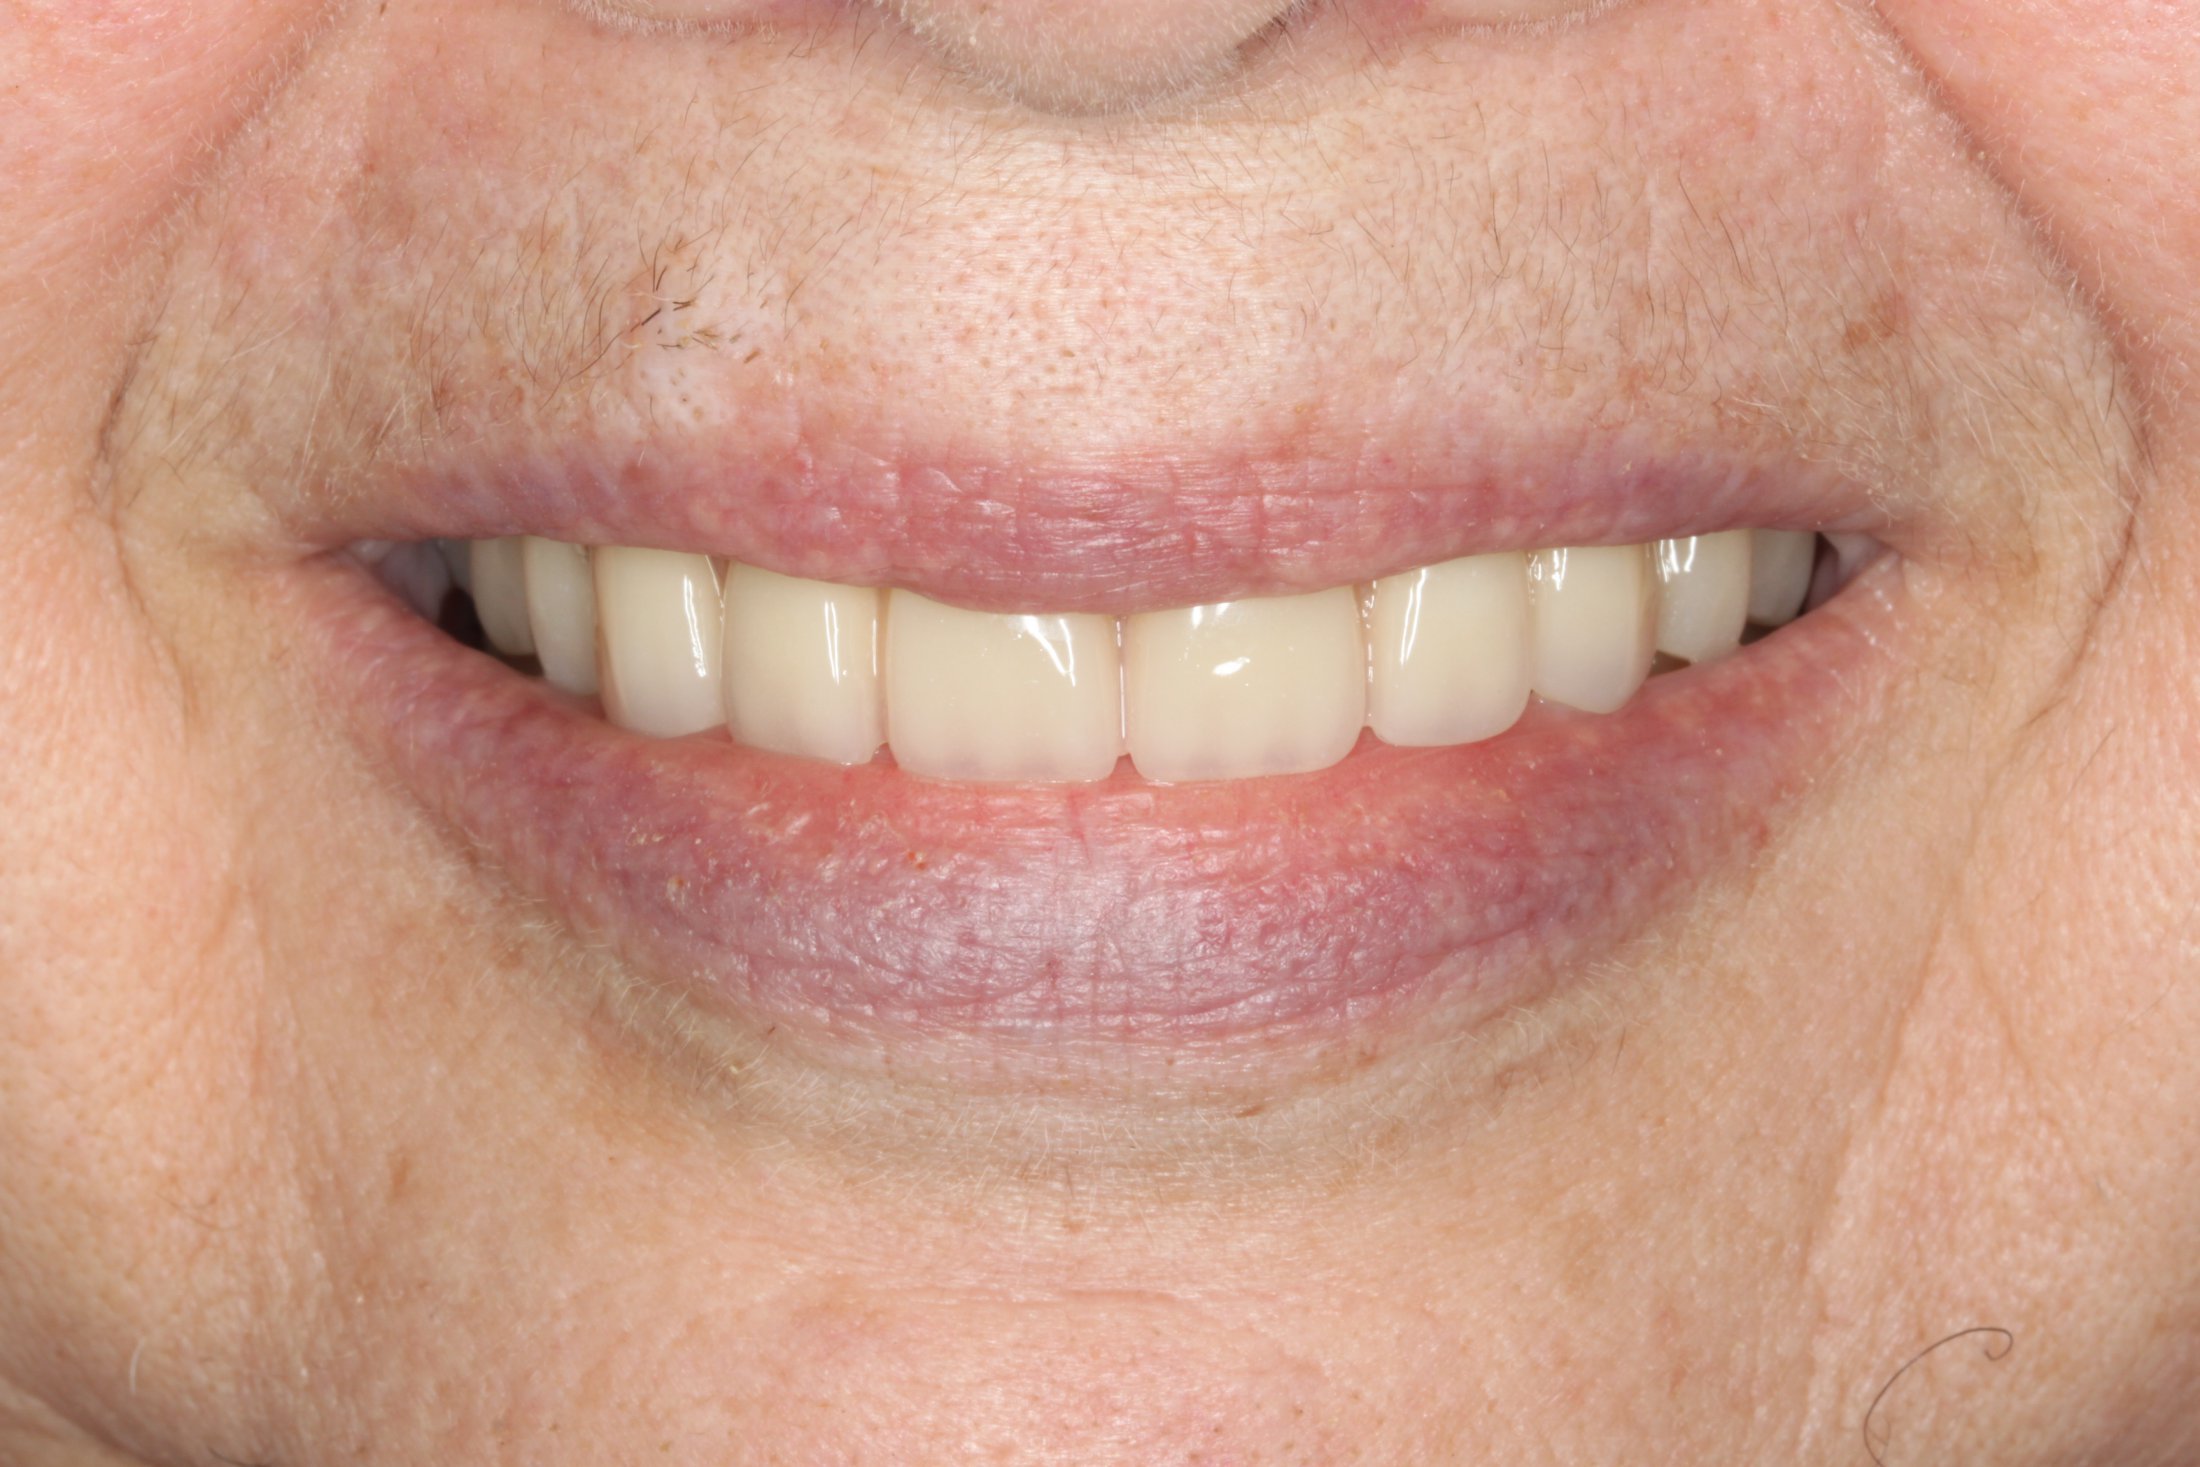 The decayed teeth have been replaced with an implant supported prosthesis, totally transforming the smile